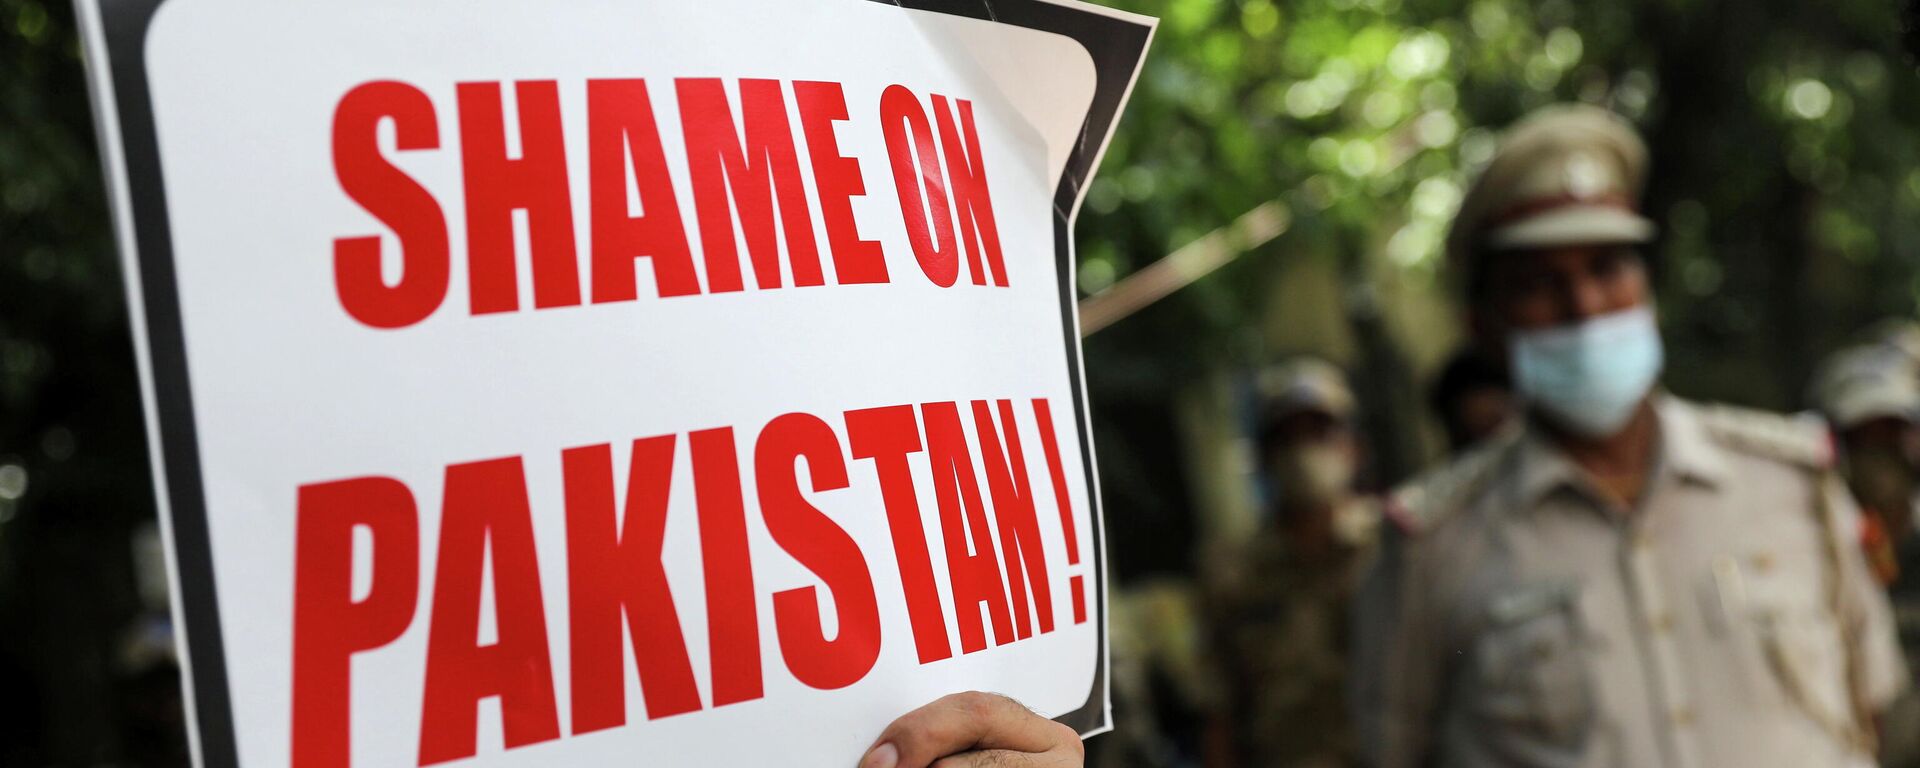 An Afghan national holds a sign during a protest against Pakistan and Taliban near a police station in New Delhi, India, September 14, 2021. - Sputnik International, 1920, 14.09.2021